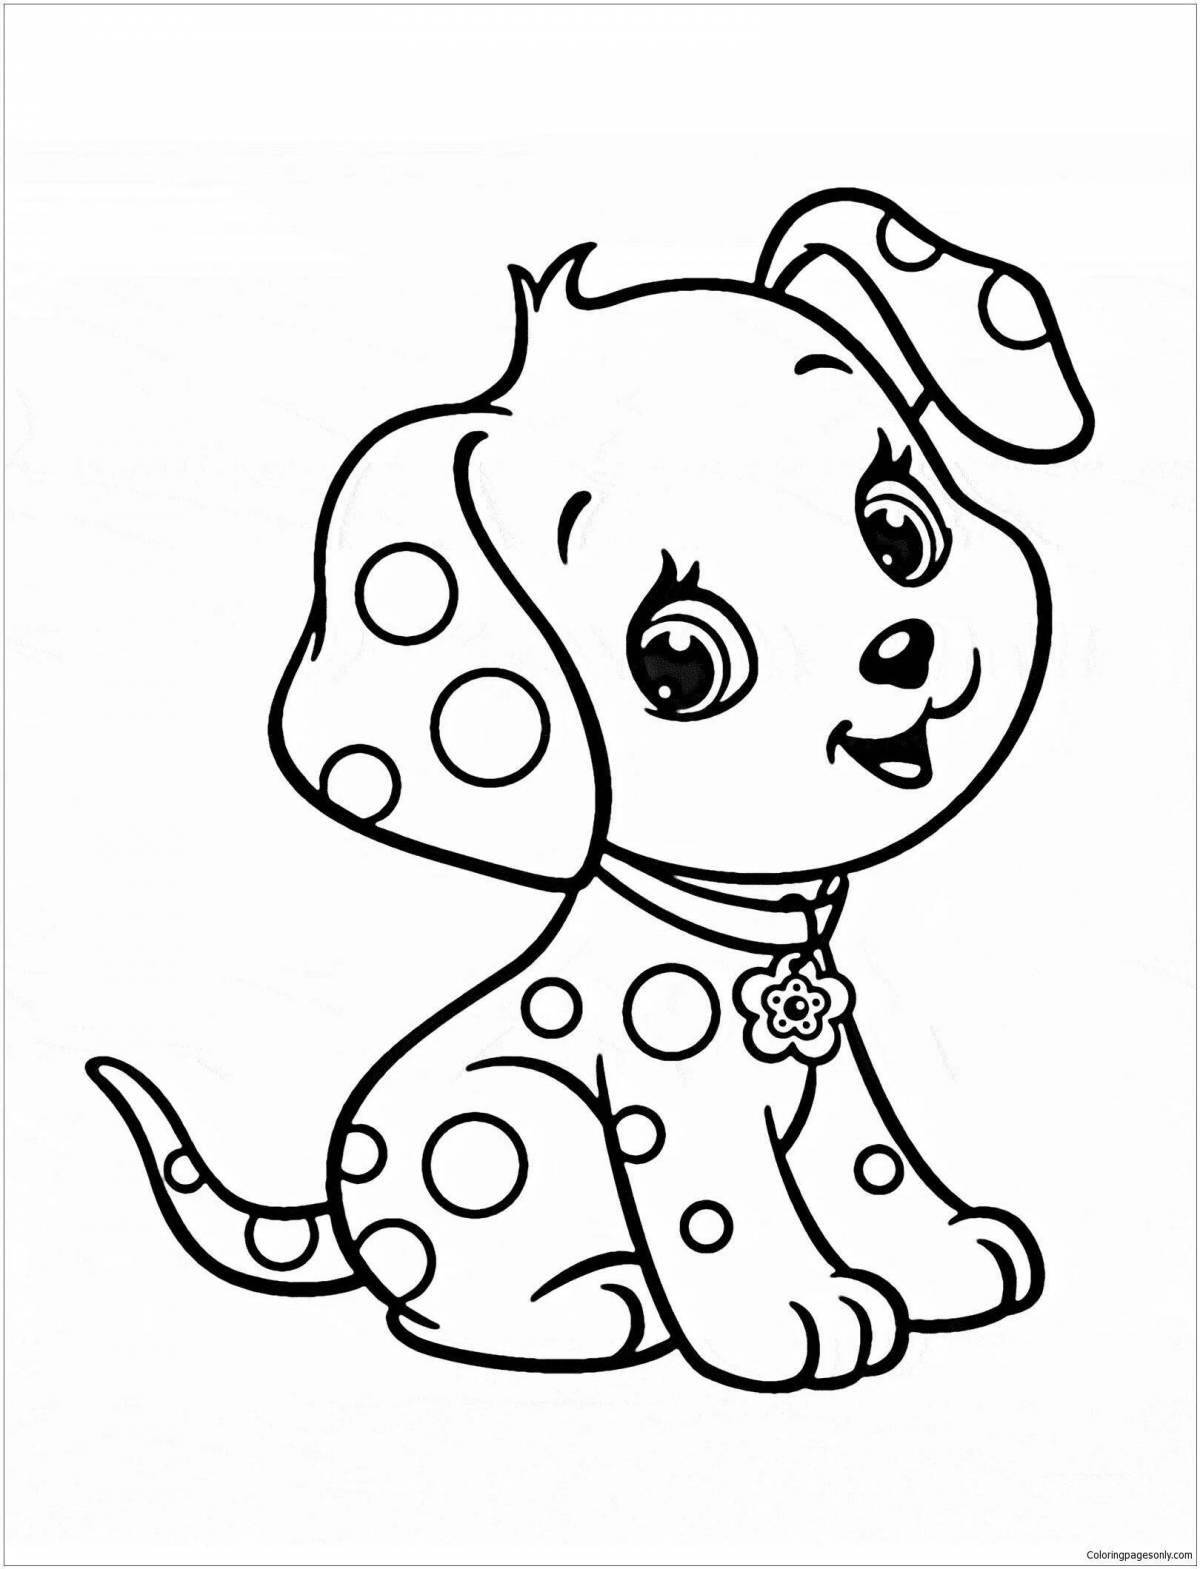 Creative coloring book for 5-6 year old girls animals